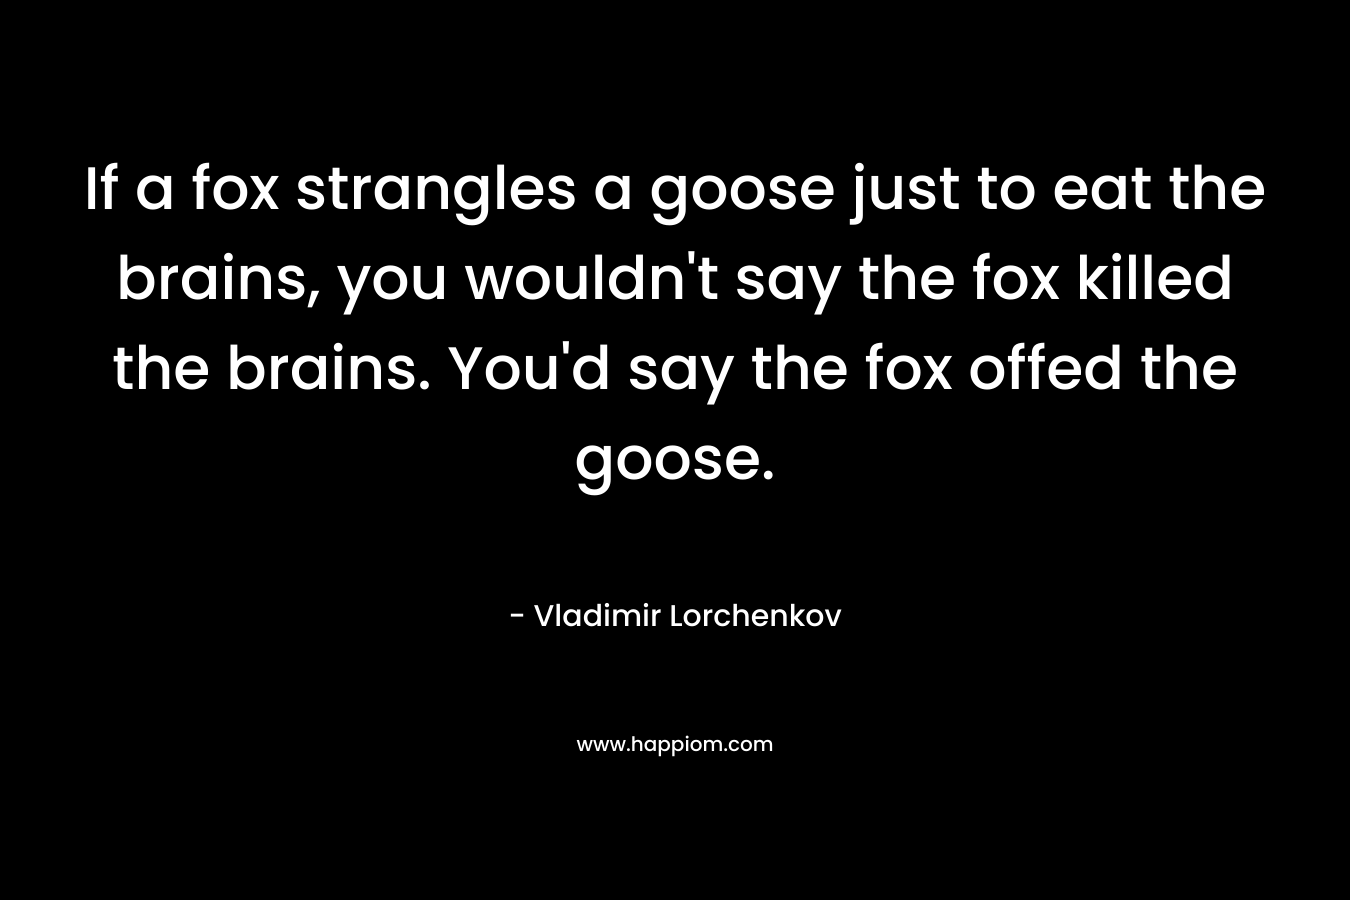 If a fox strangles a goose just to eat the brains, you wouldn’t say the fox killed the brains. You’d say the fox offed the goose. – Vladimir Lorchenkov